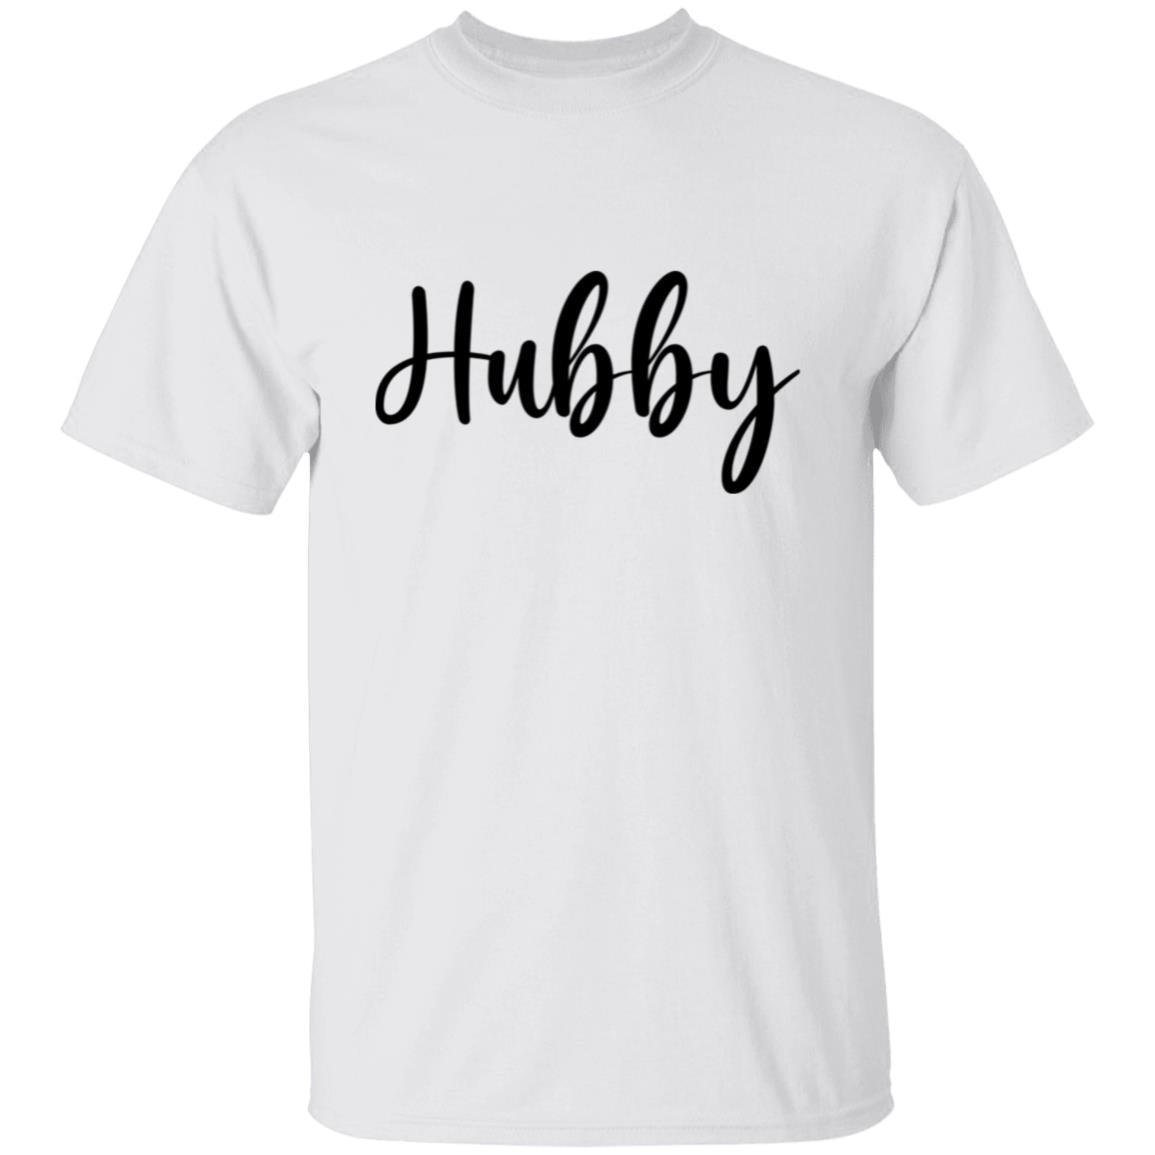 Get trendy with Hubby Hubby T shirt - T-Shirts available at Good Gift Company. Grab yours for $22.95 today!